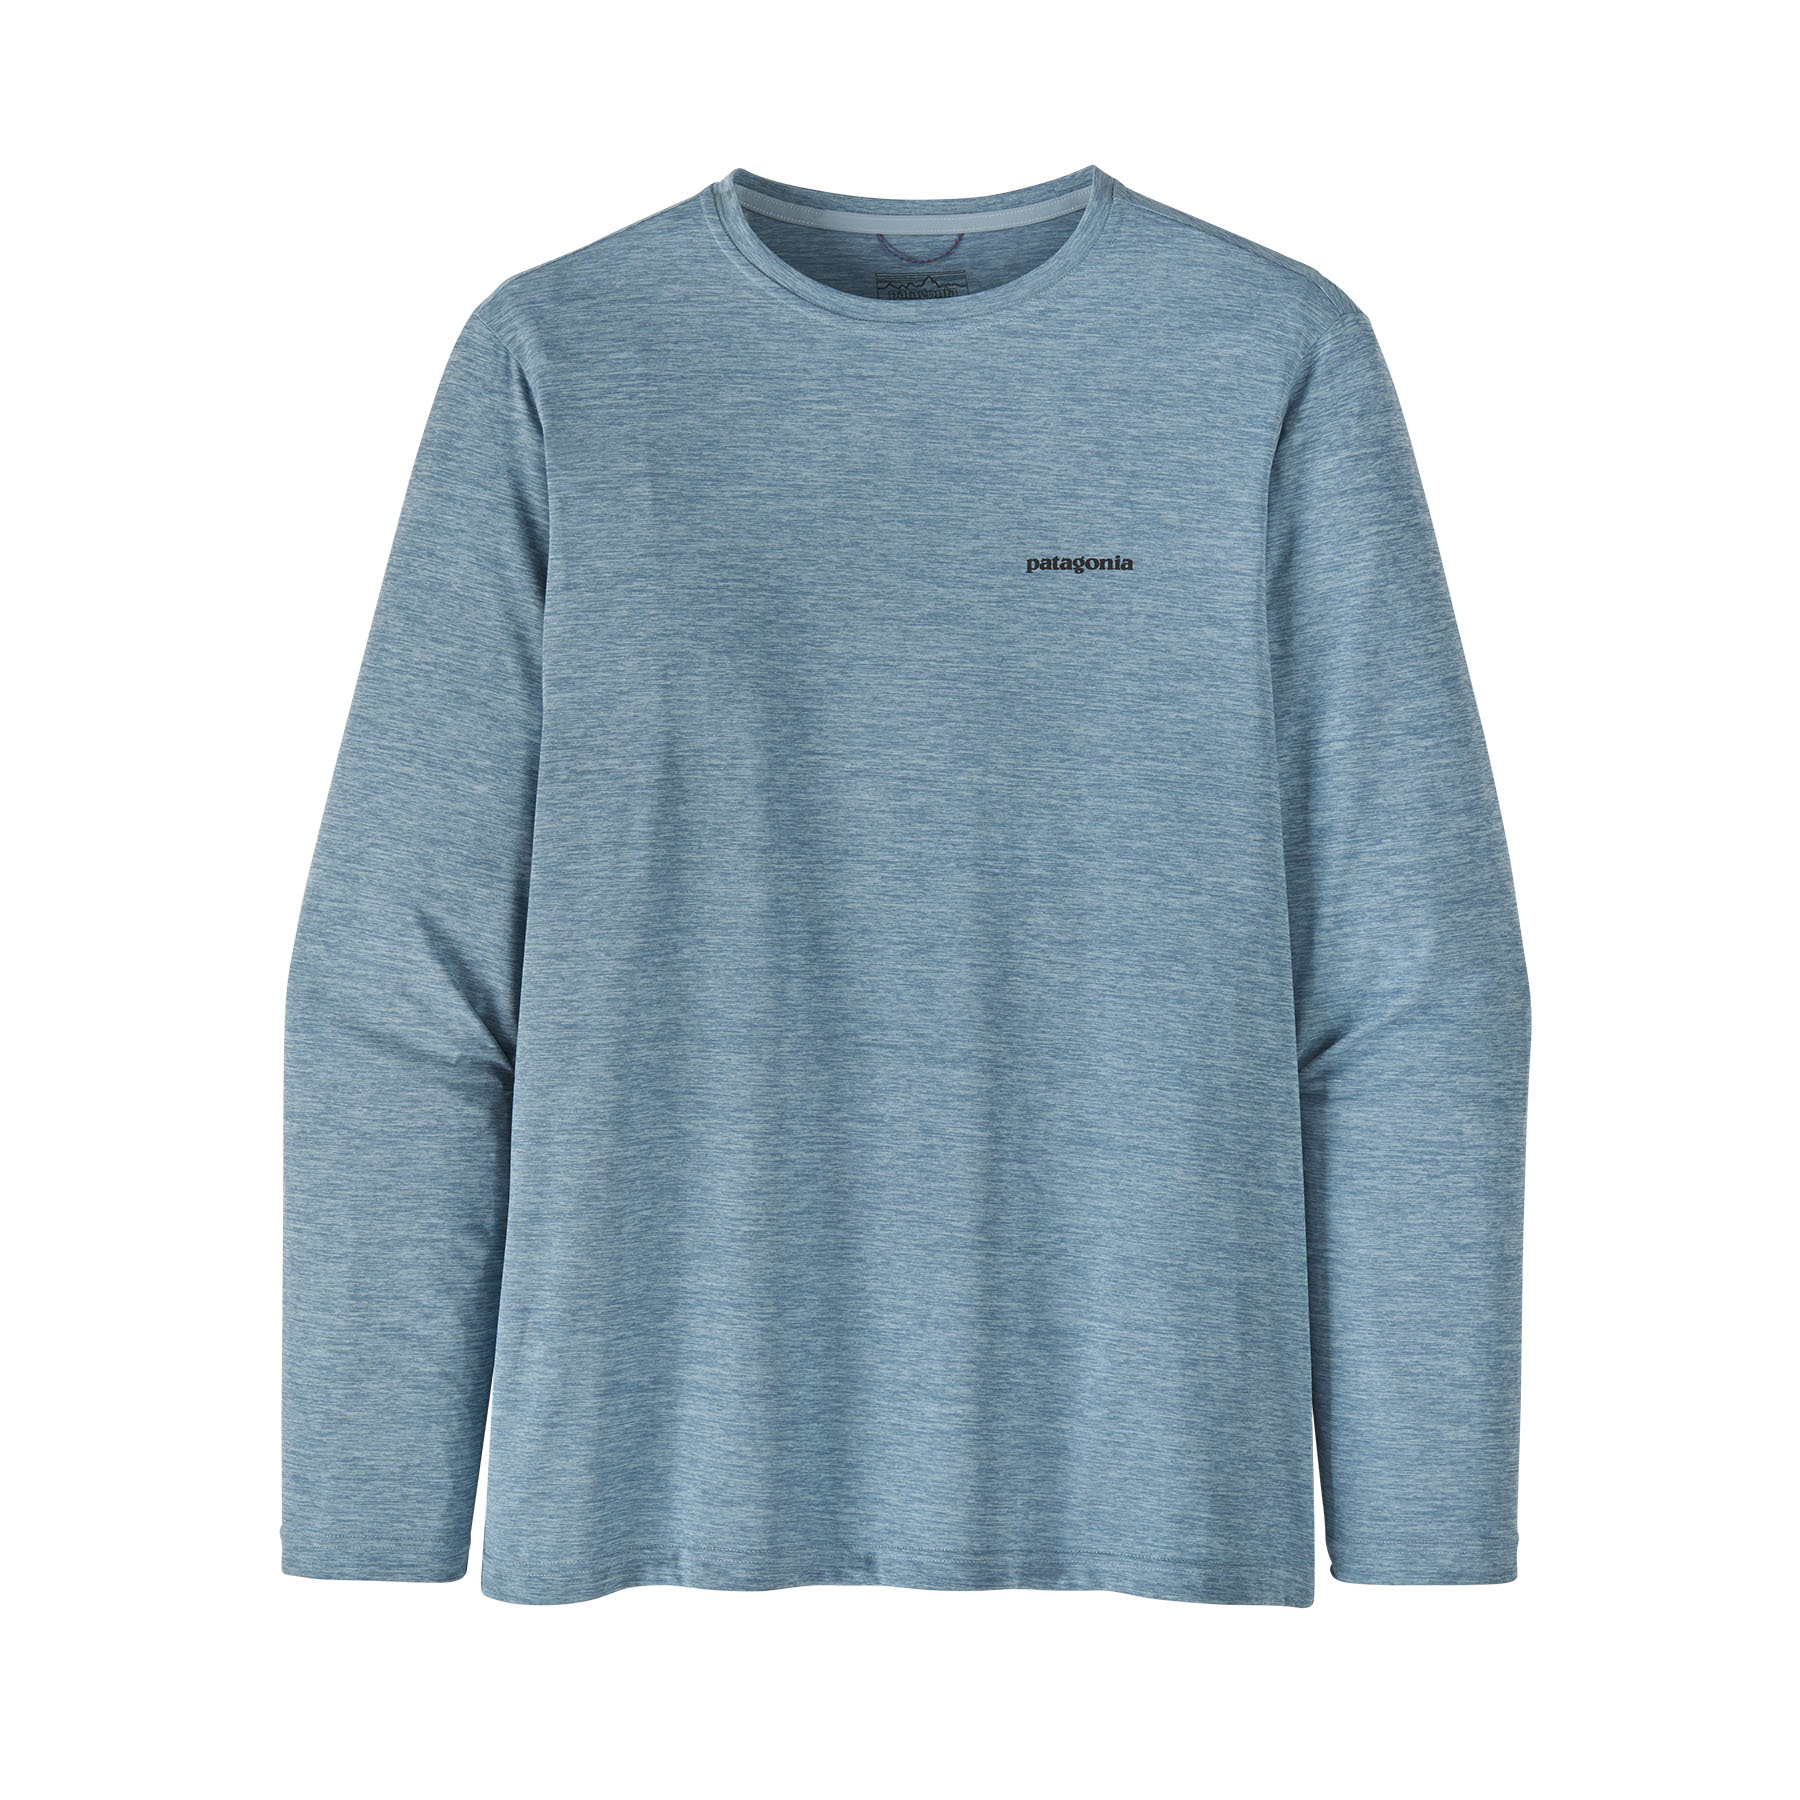 Longsleeve Cap Cool Daily Fish Graphic Shirt (Fitz Roy Trout: Steam Blue)